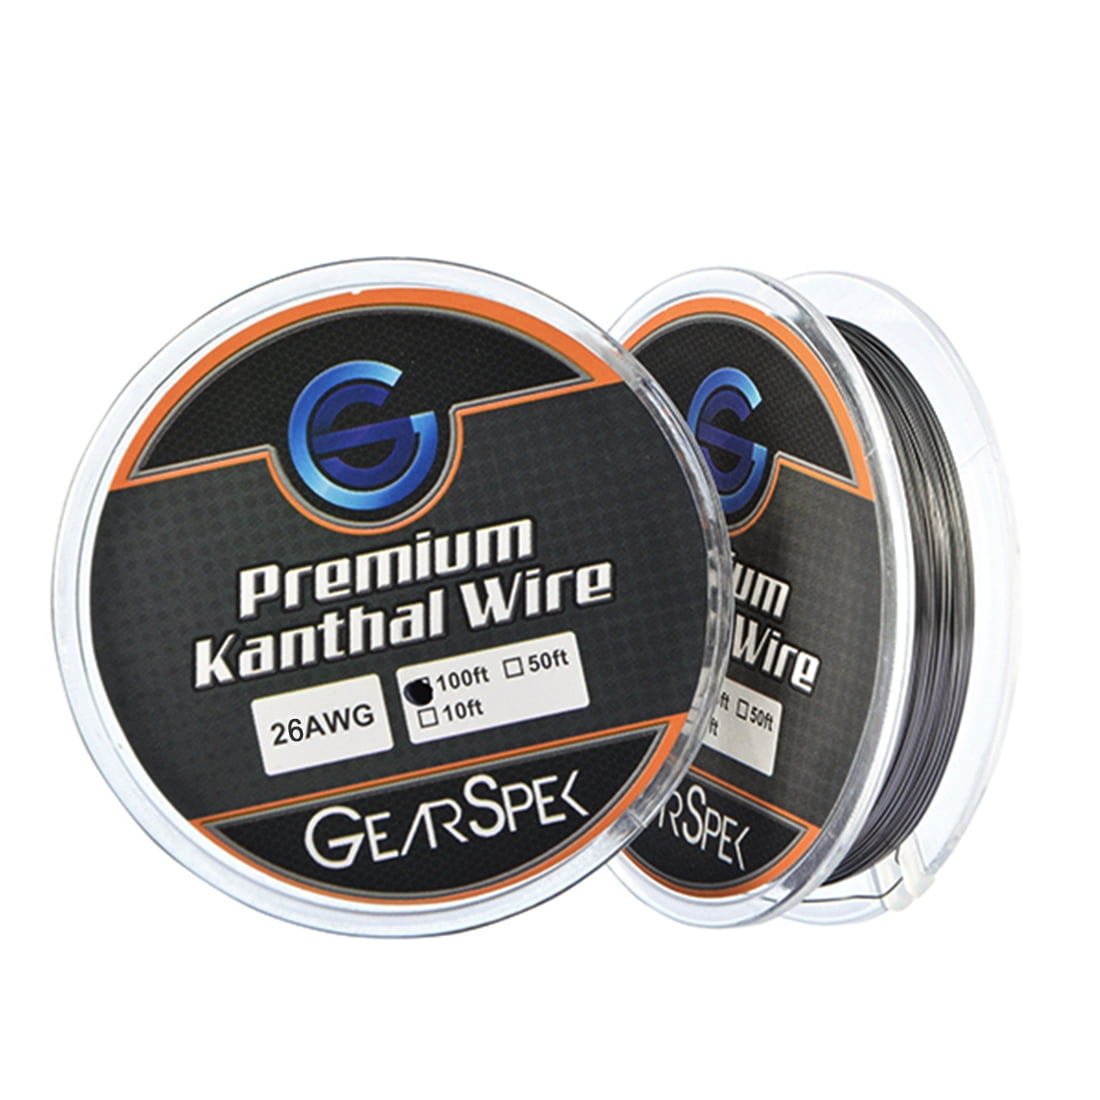 KANTHAL WIRE/HEATING WIRE  26 AWG 25 METER LENGTHS 